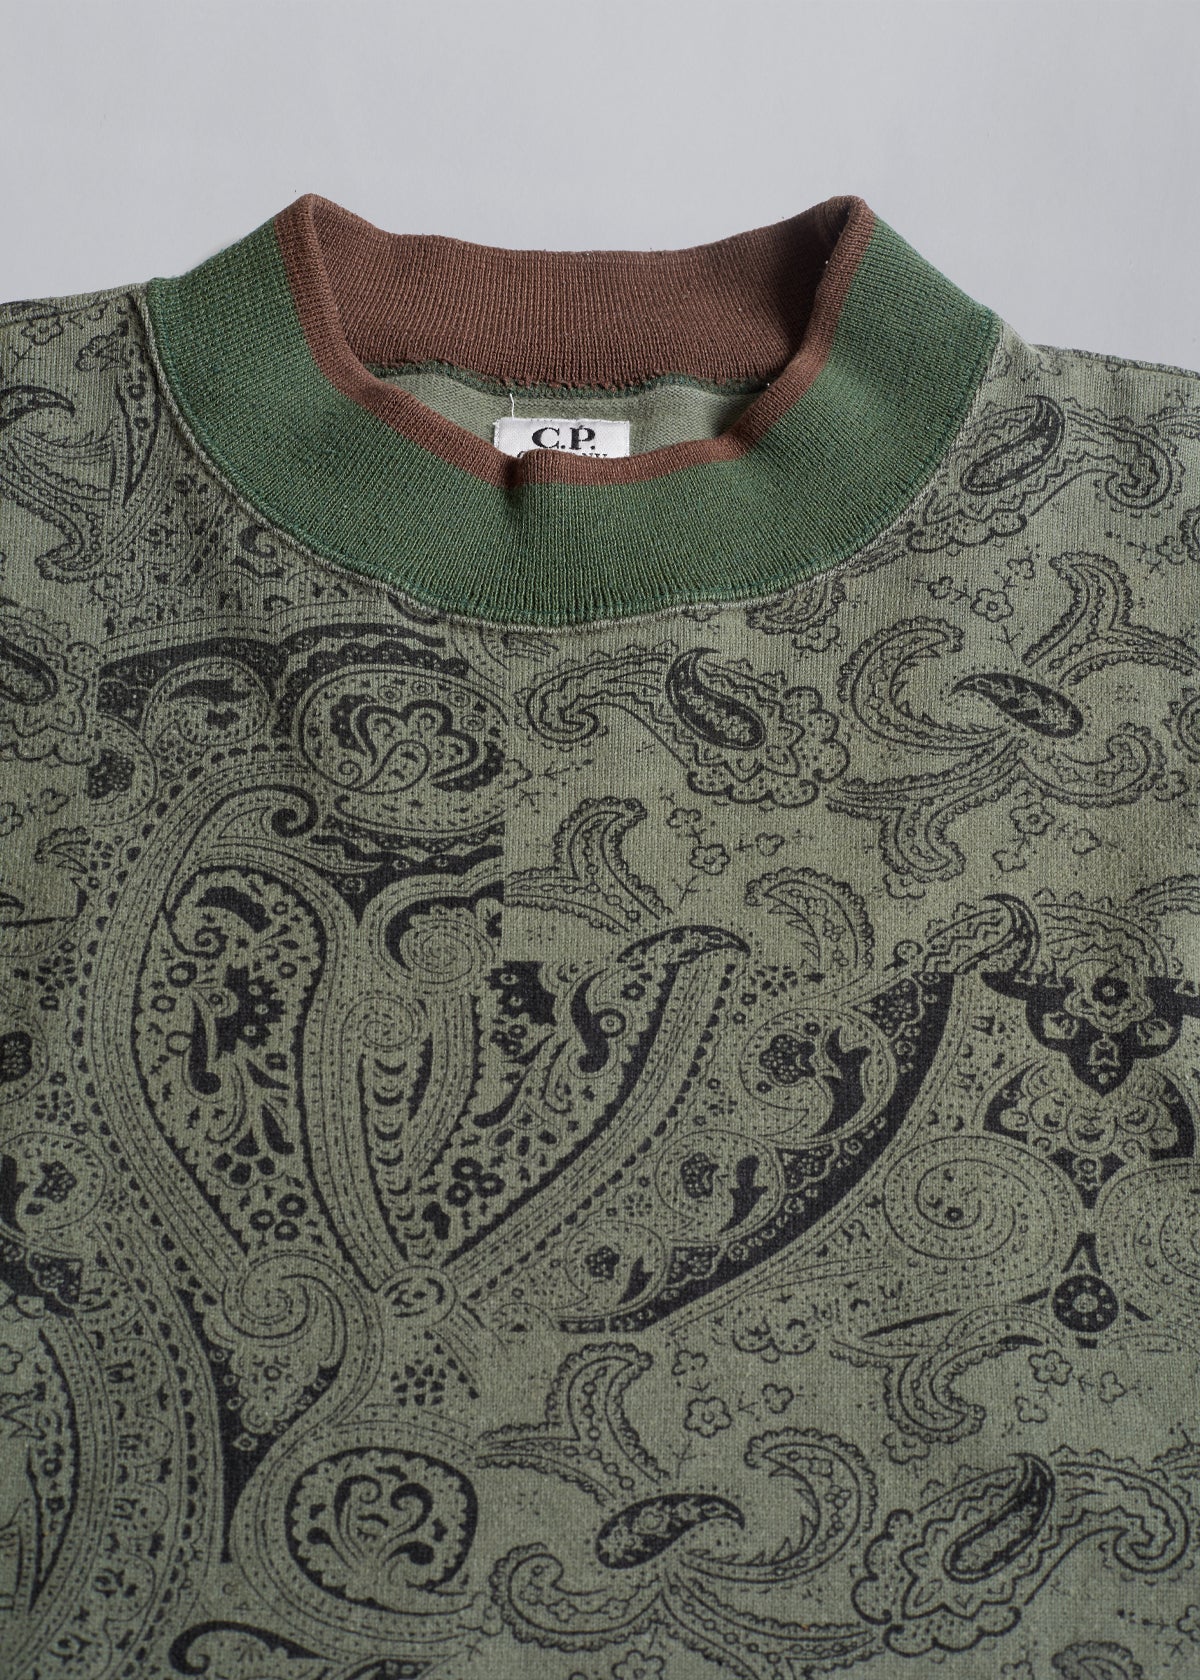 Paisley All Over Crewneck Sweatshirt 1980's - X-Large - The Archivist Store